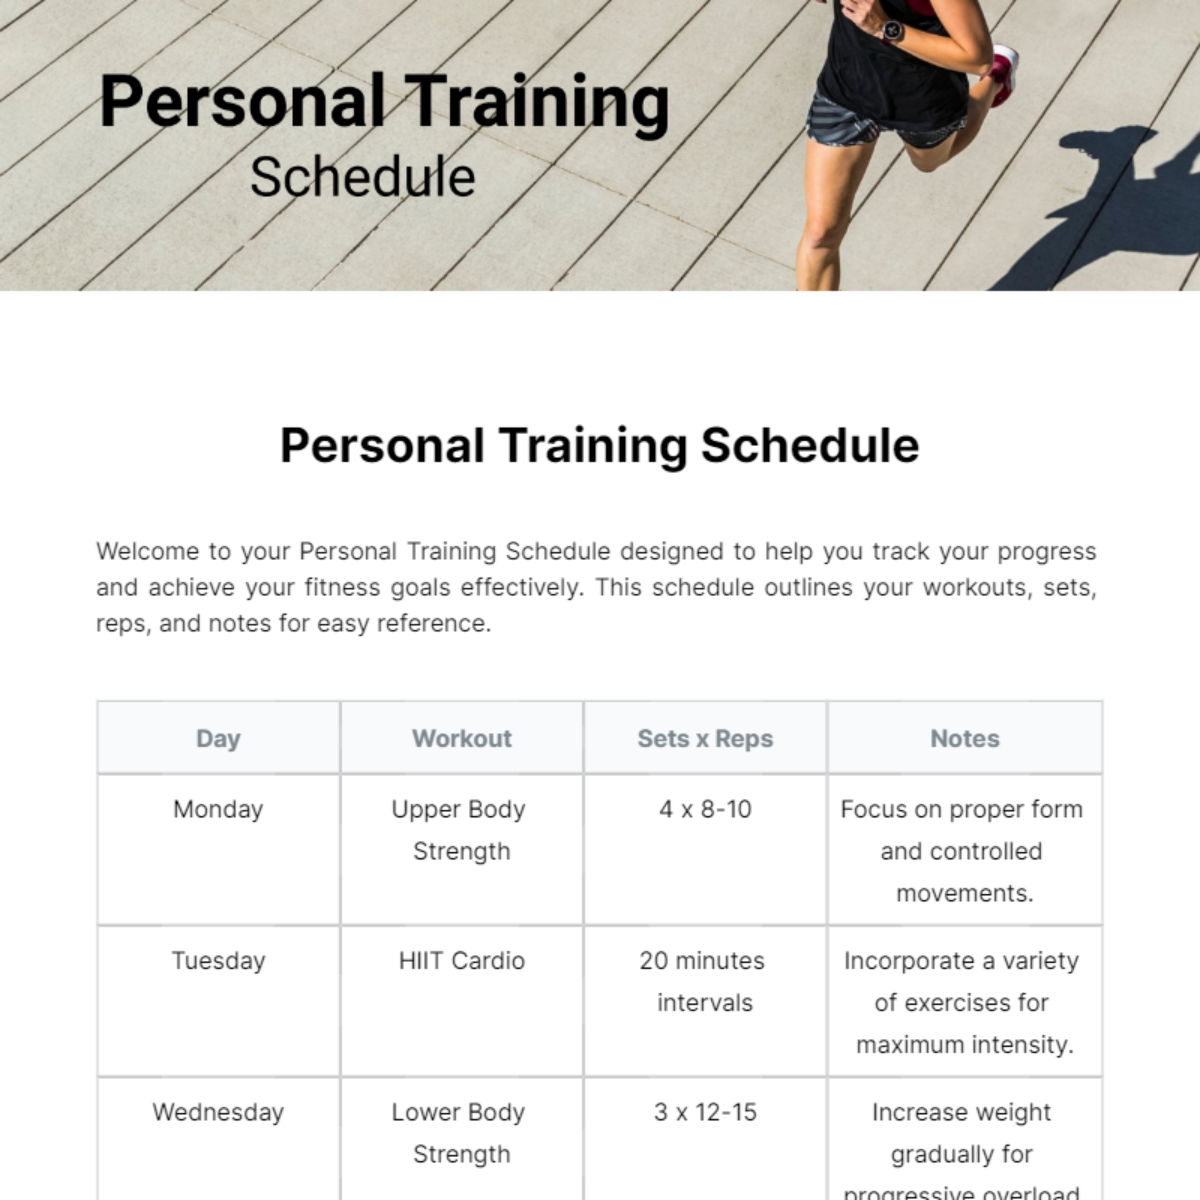 Personal Training Schedule Template